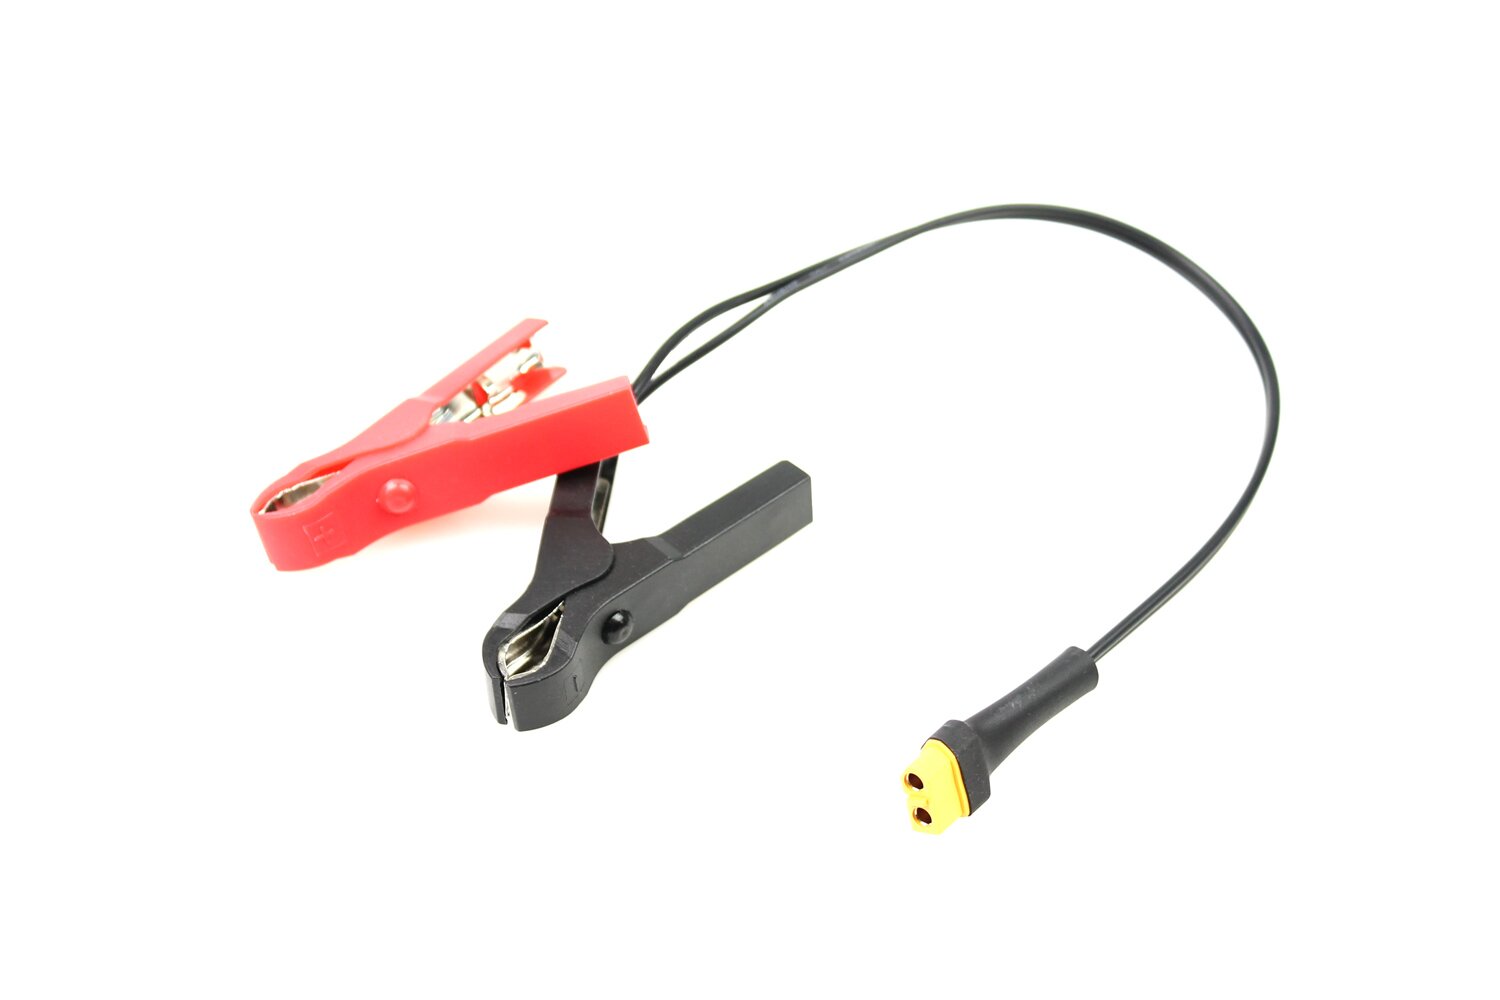 Load adapter cable with crocodile terminals on XF2 / XF3 charging clipping XT60